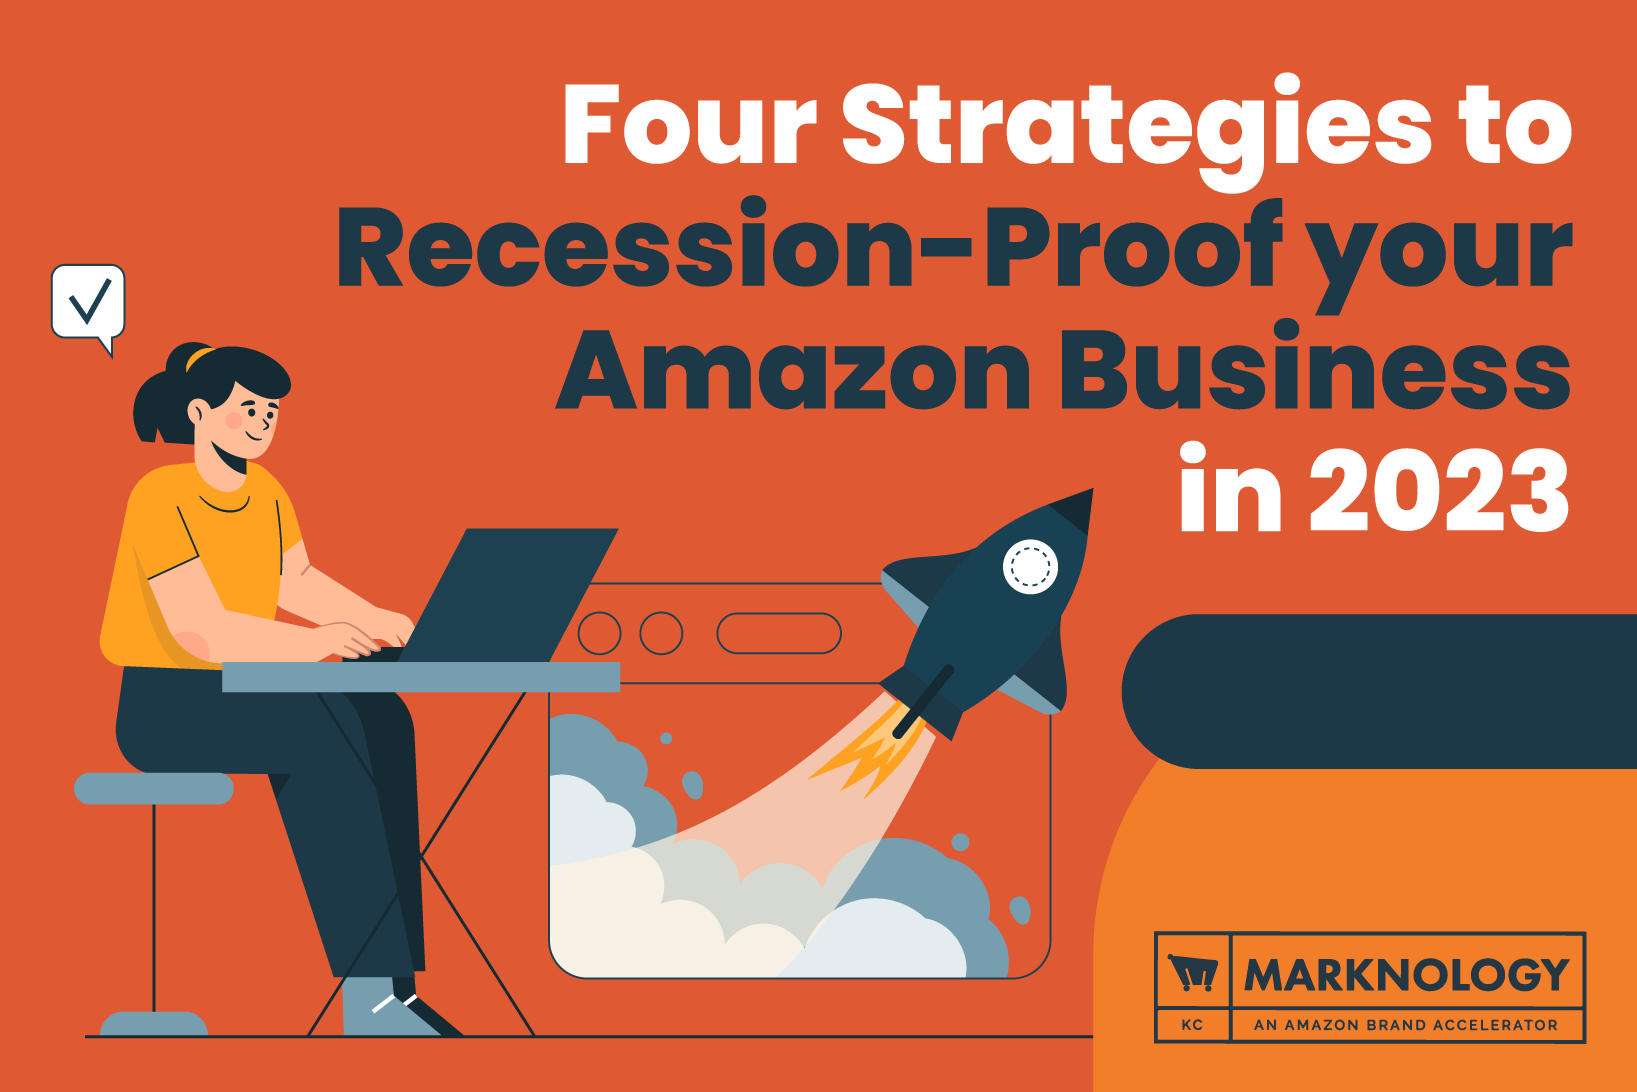 Four Strategies to Recession-Proof your Amazon Business in 2023